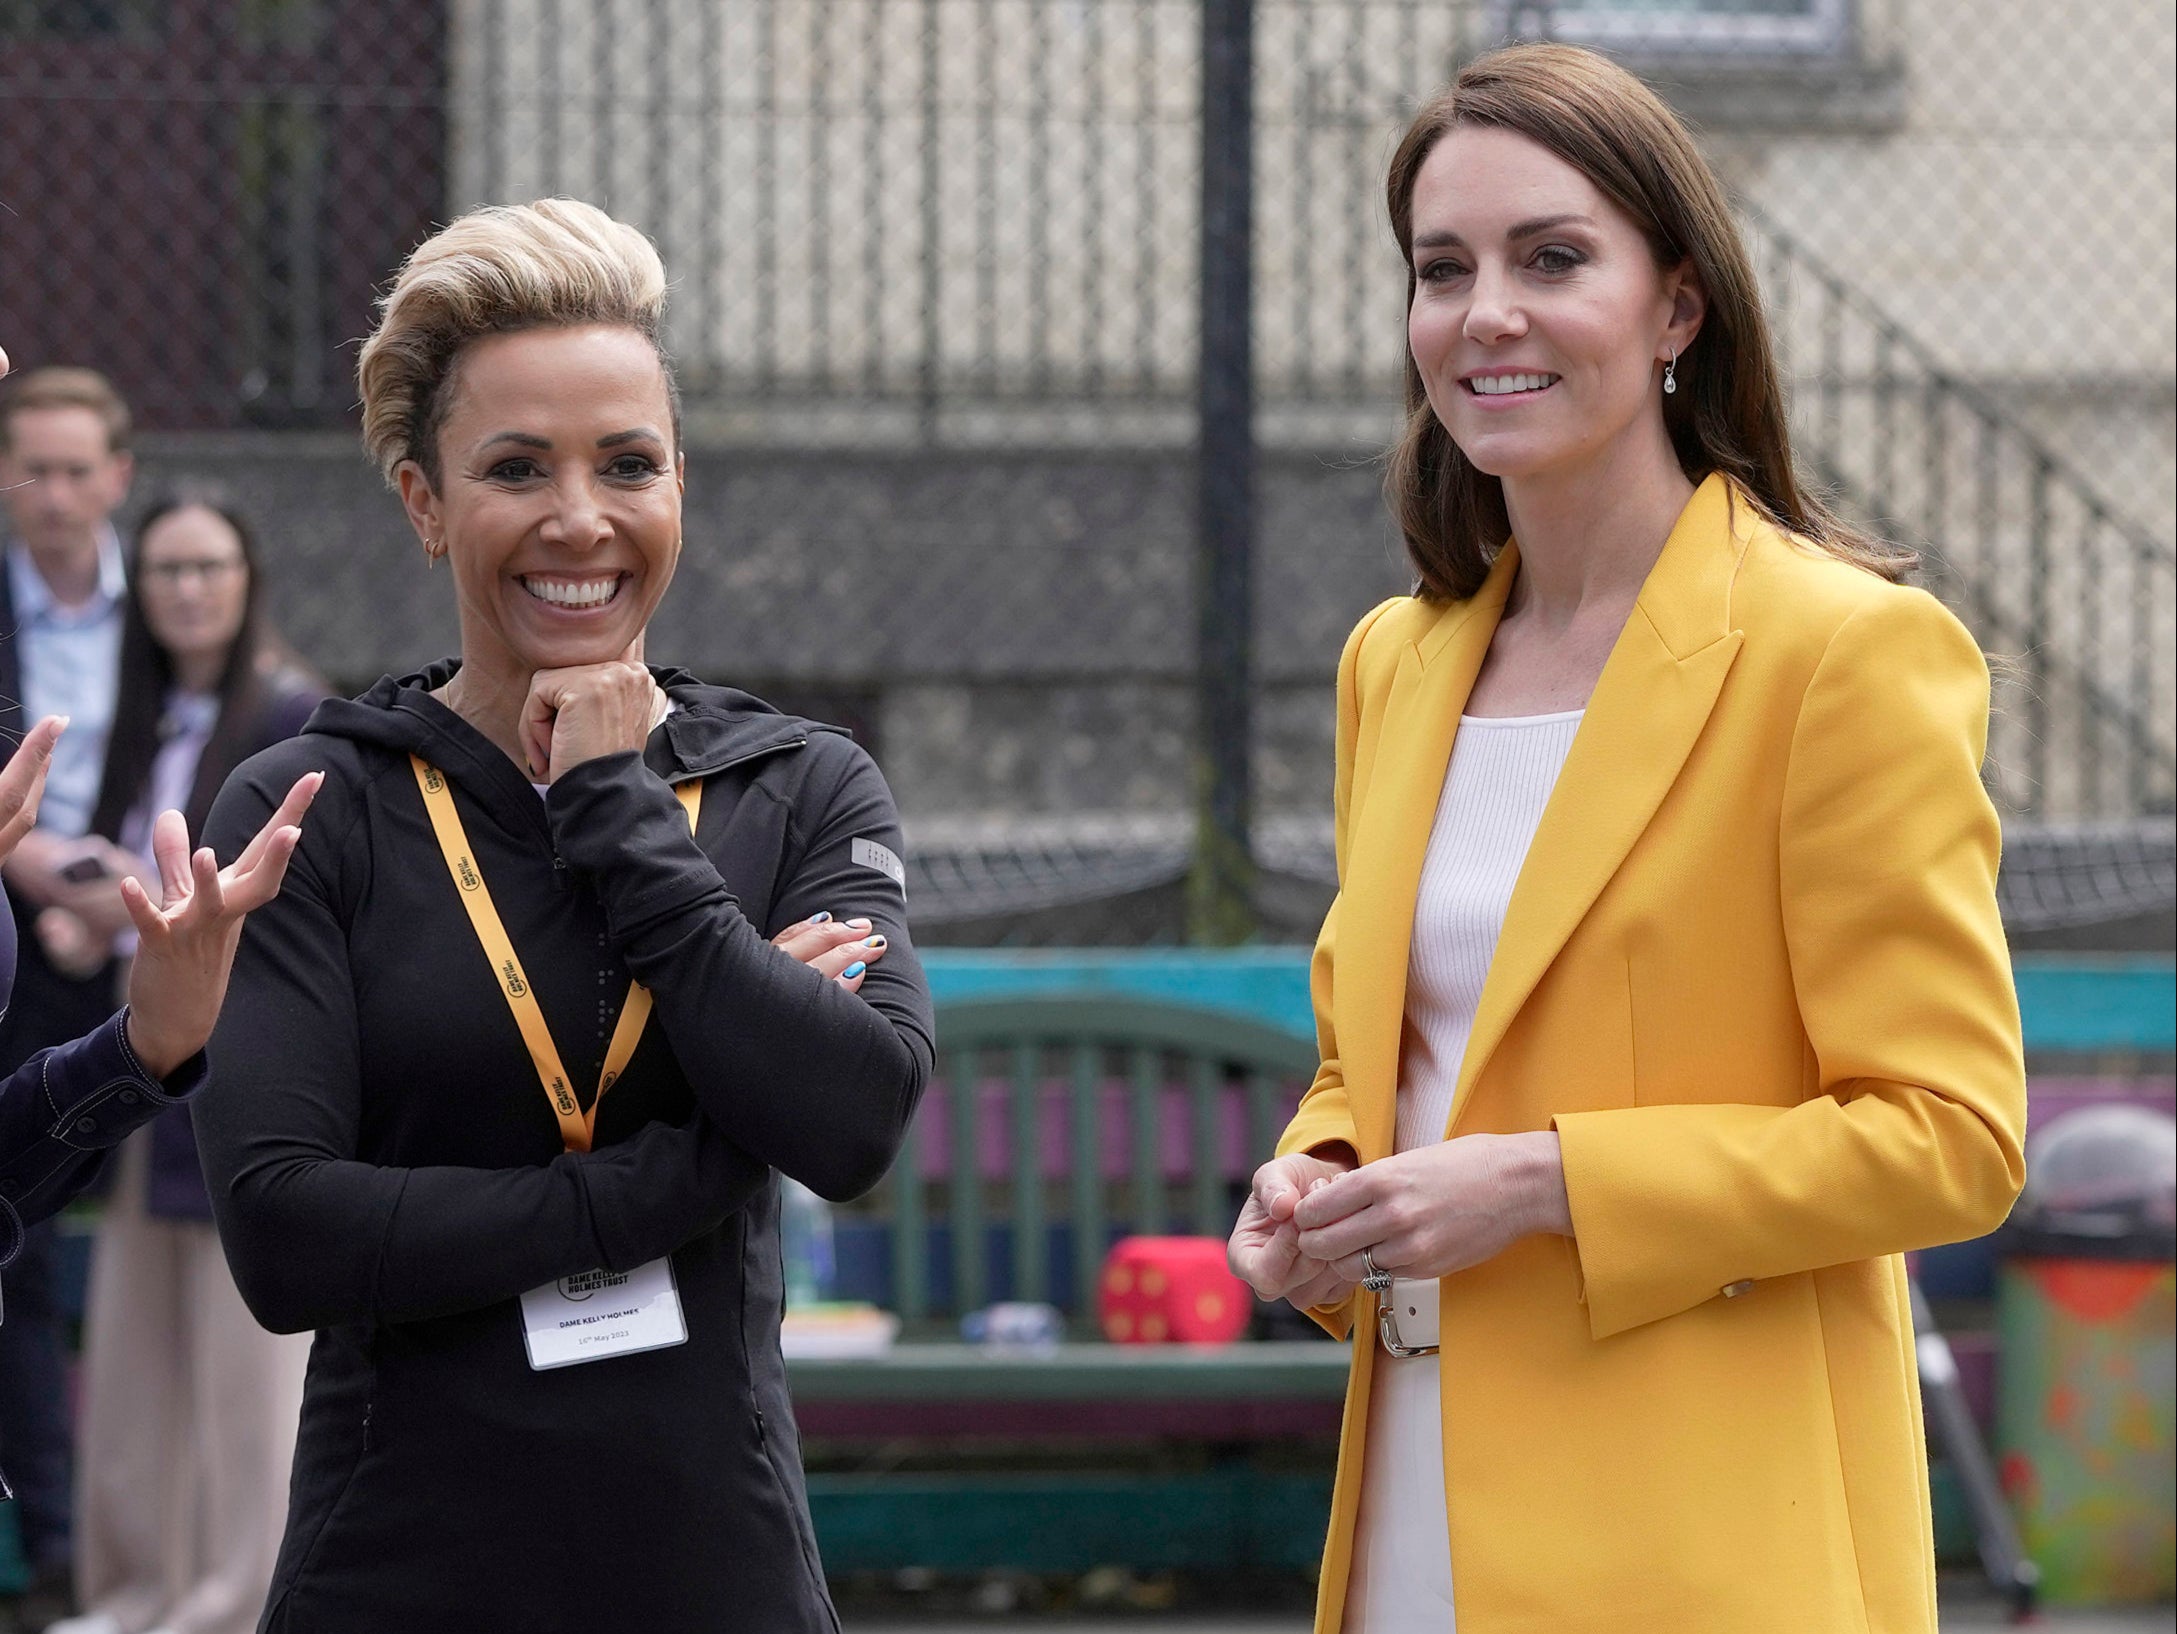 The Princess of Wales (right) and Dame Kelly Holmes (centre) during a visit to the Percy Community Centre in Bath, to meet some of the young people supported by the Dame Kelly Holmes Trust youth development charity